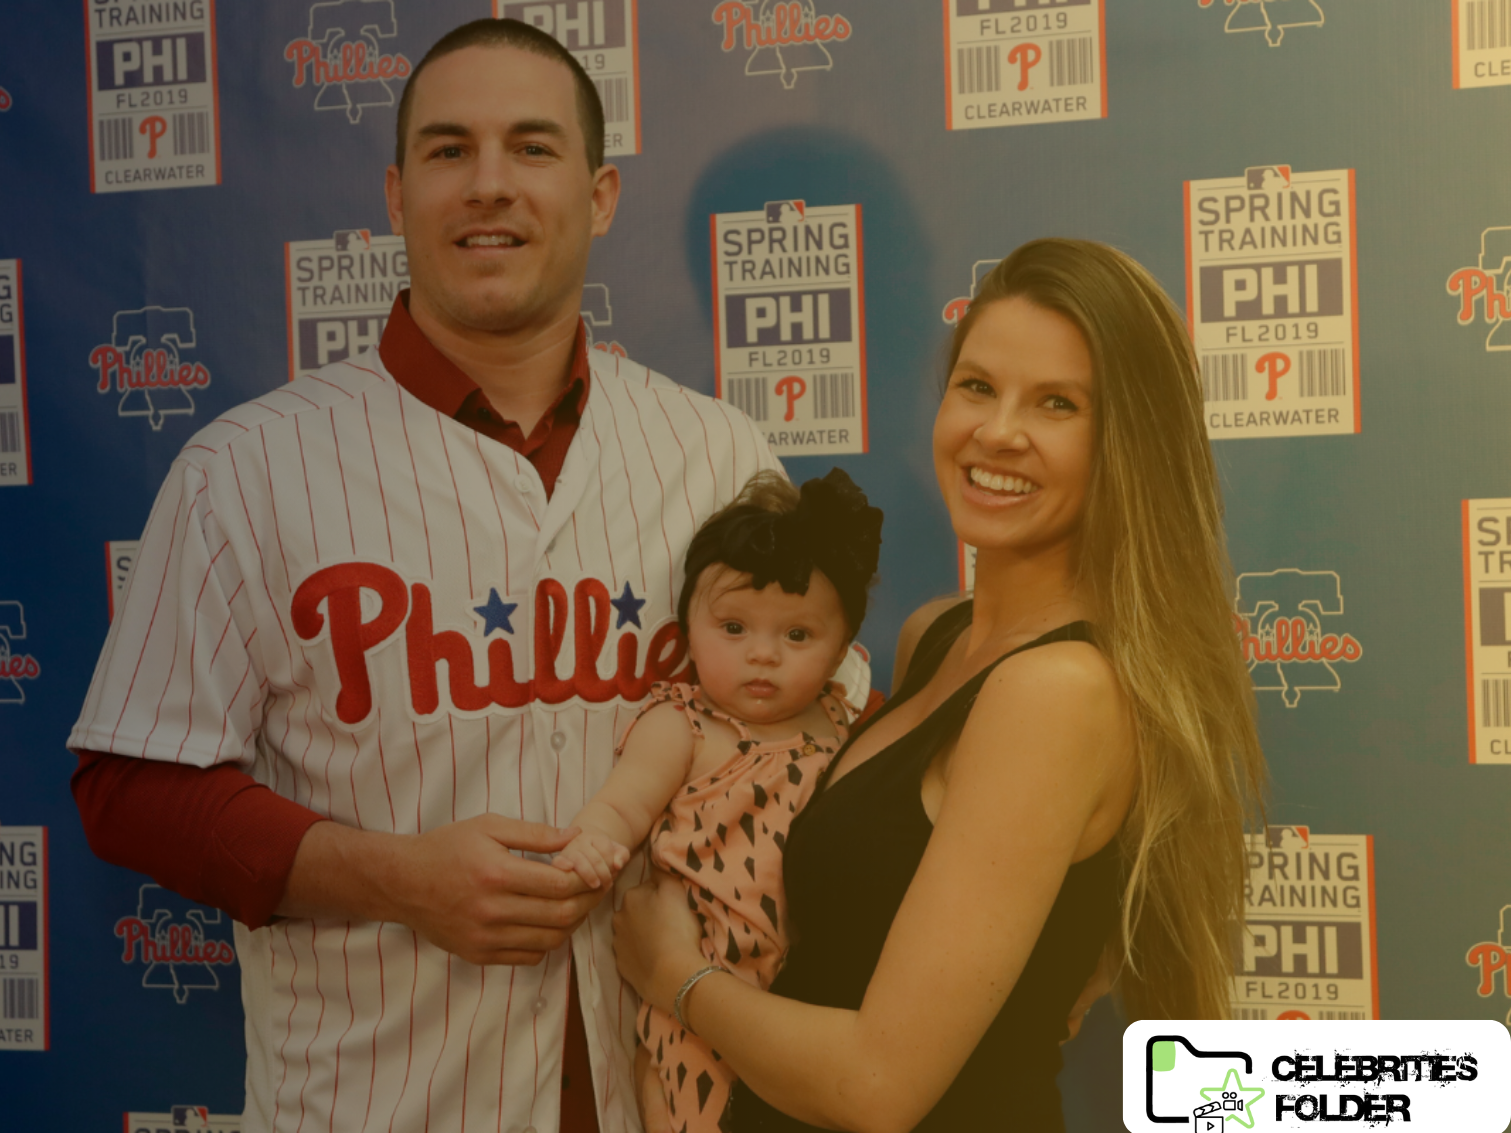 JT Realmuto’s Wife Alexis Realmuto